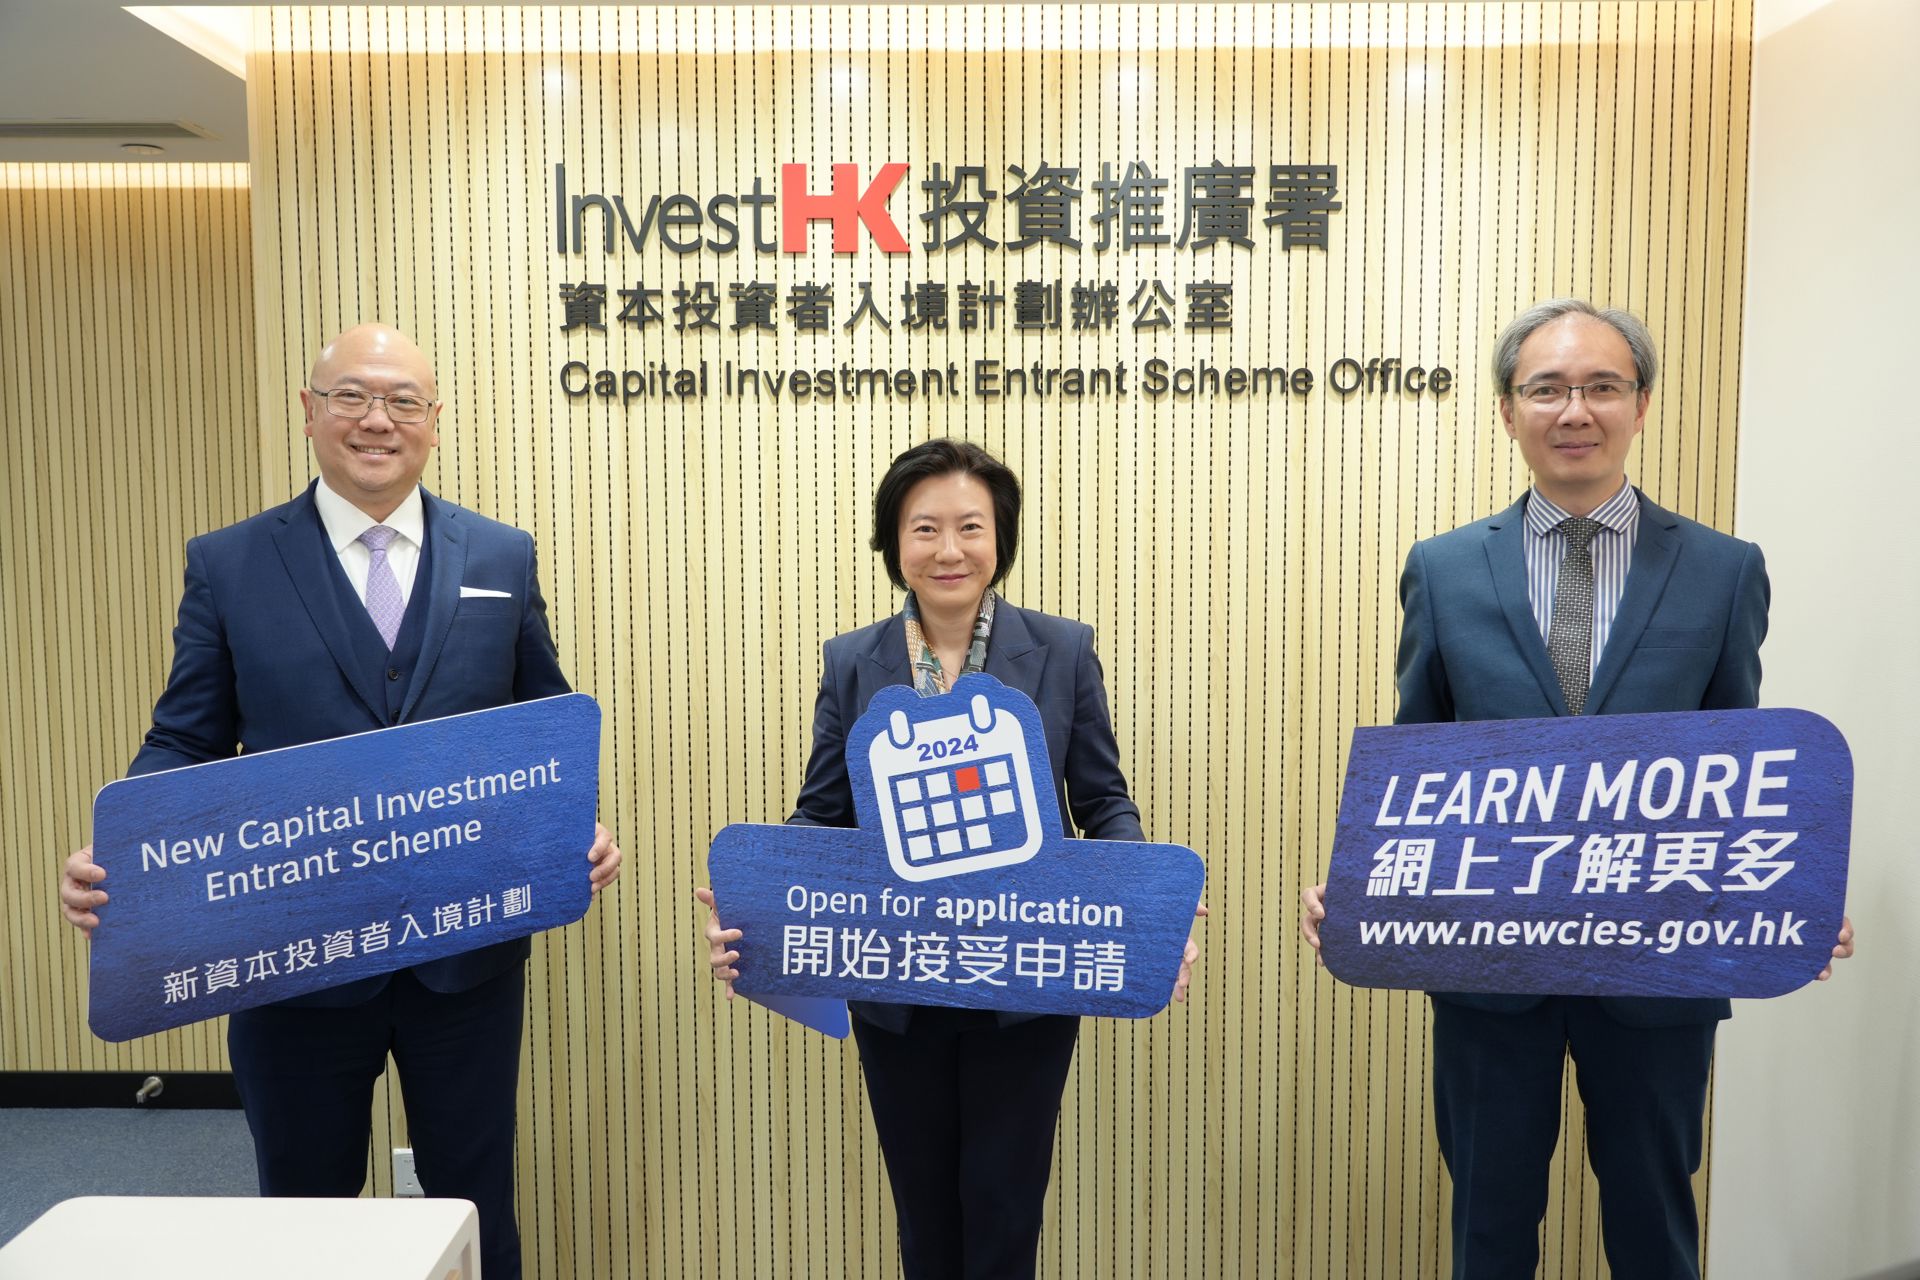 The Director-General of Investment Promotion, Ms Alpha Lau (centre); Associate Director-General of Investment Promotion Mr Charles Ng (left); and the Chief Executive Officer (New Capital Investment Entrant Scheme Office), Mr Joseph Yu (right) at the office